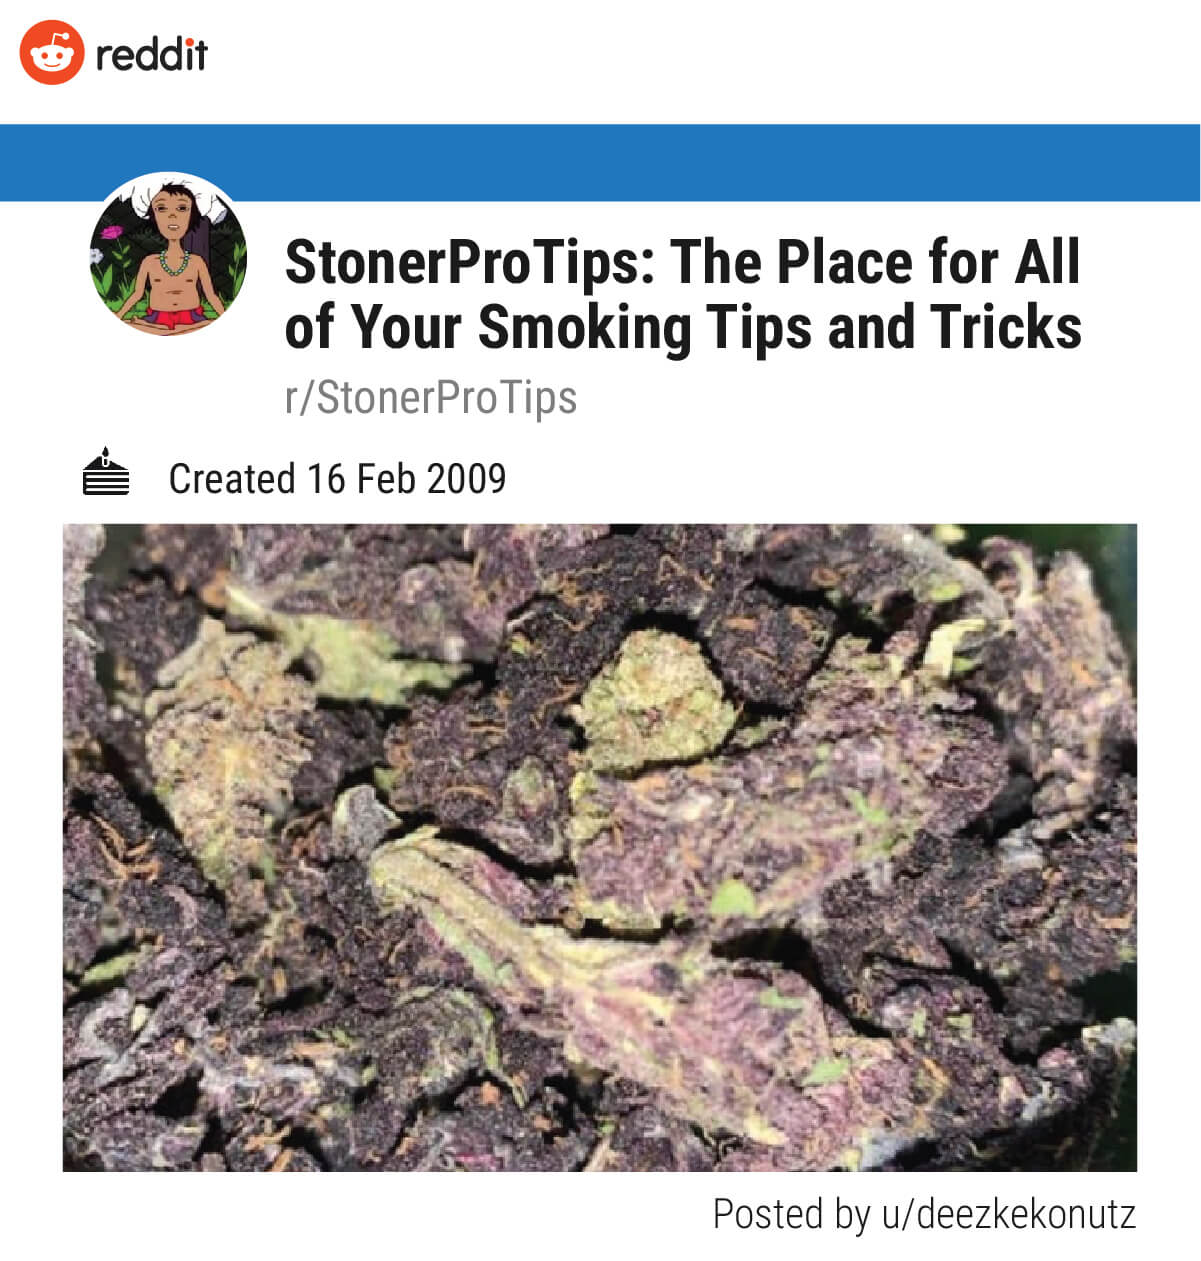 StonerProTips: The Place for All of Your Smoking Tips and Tricks (r/StonerProTips)